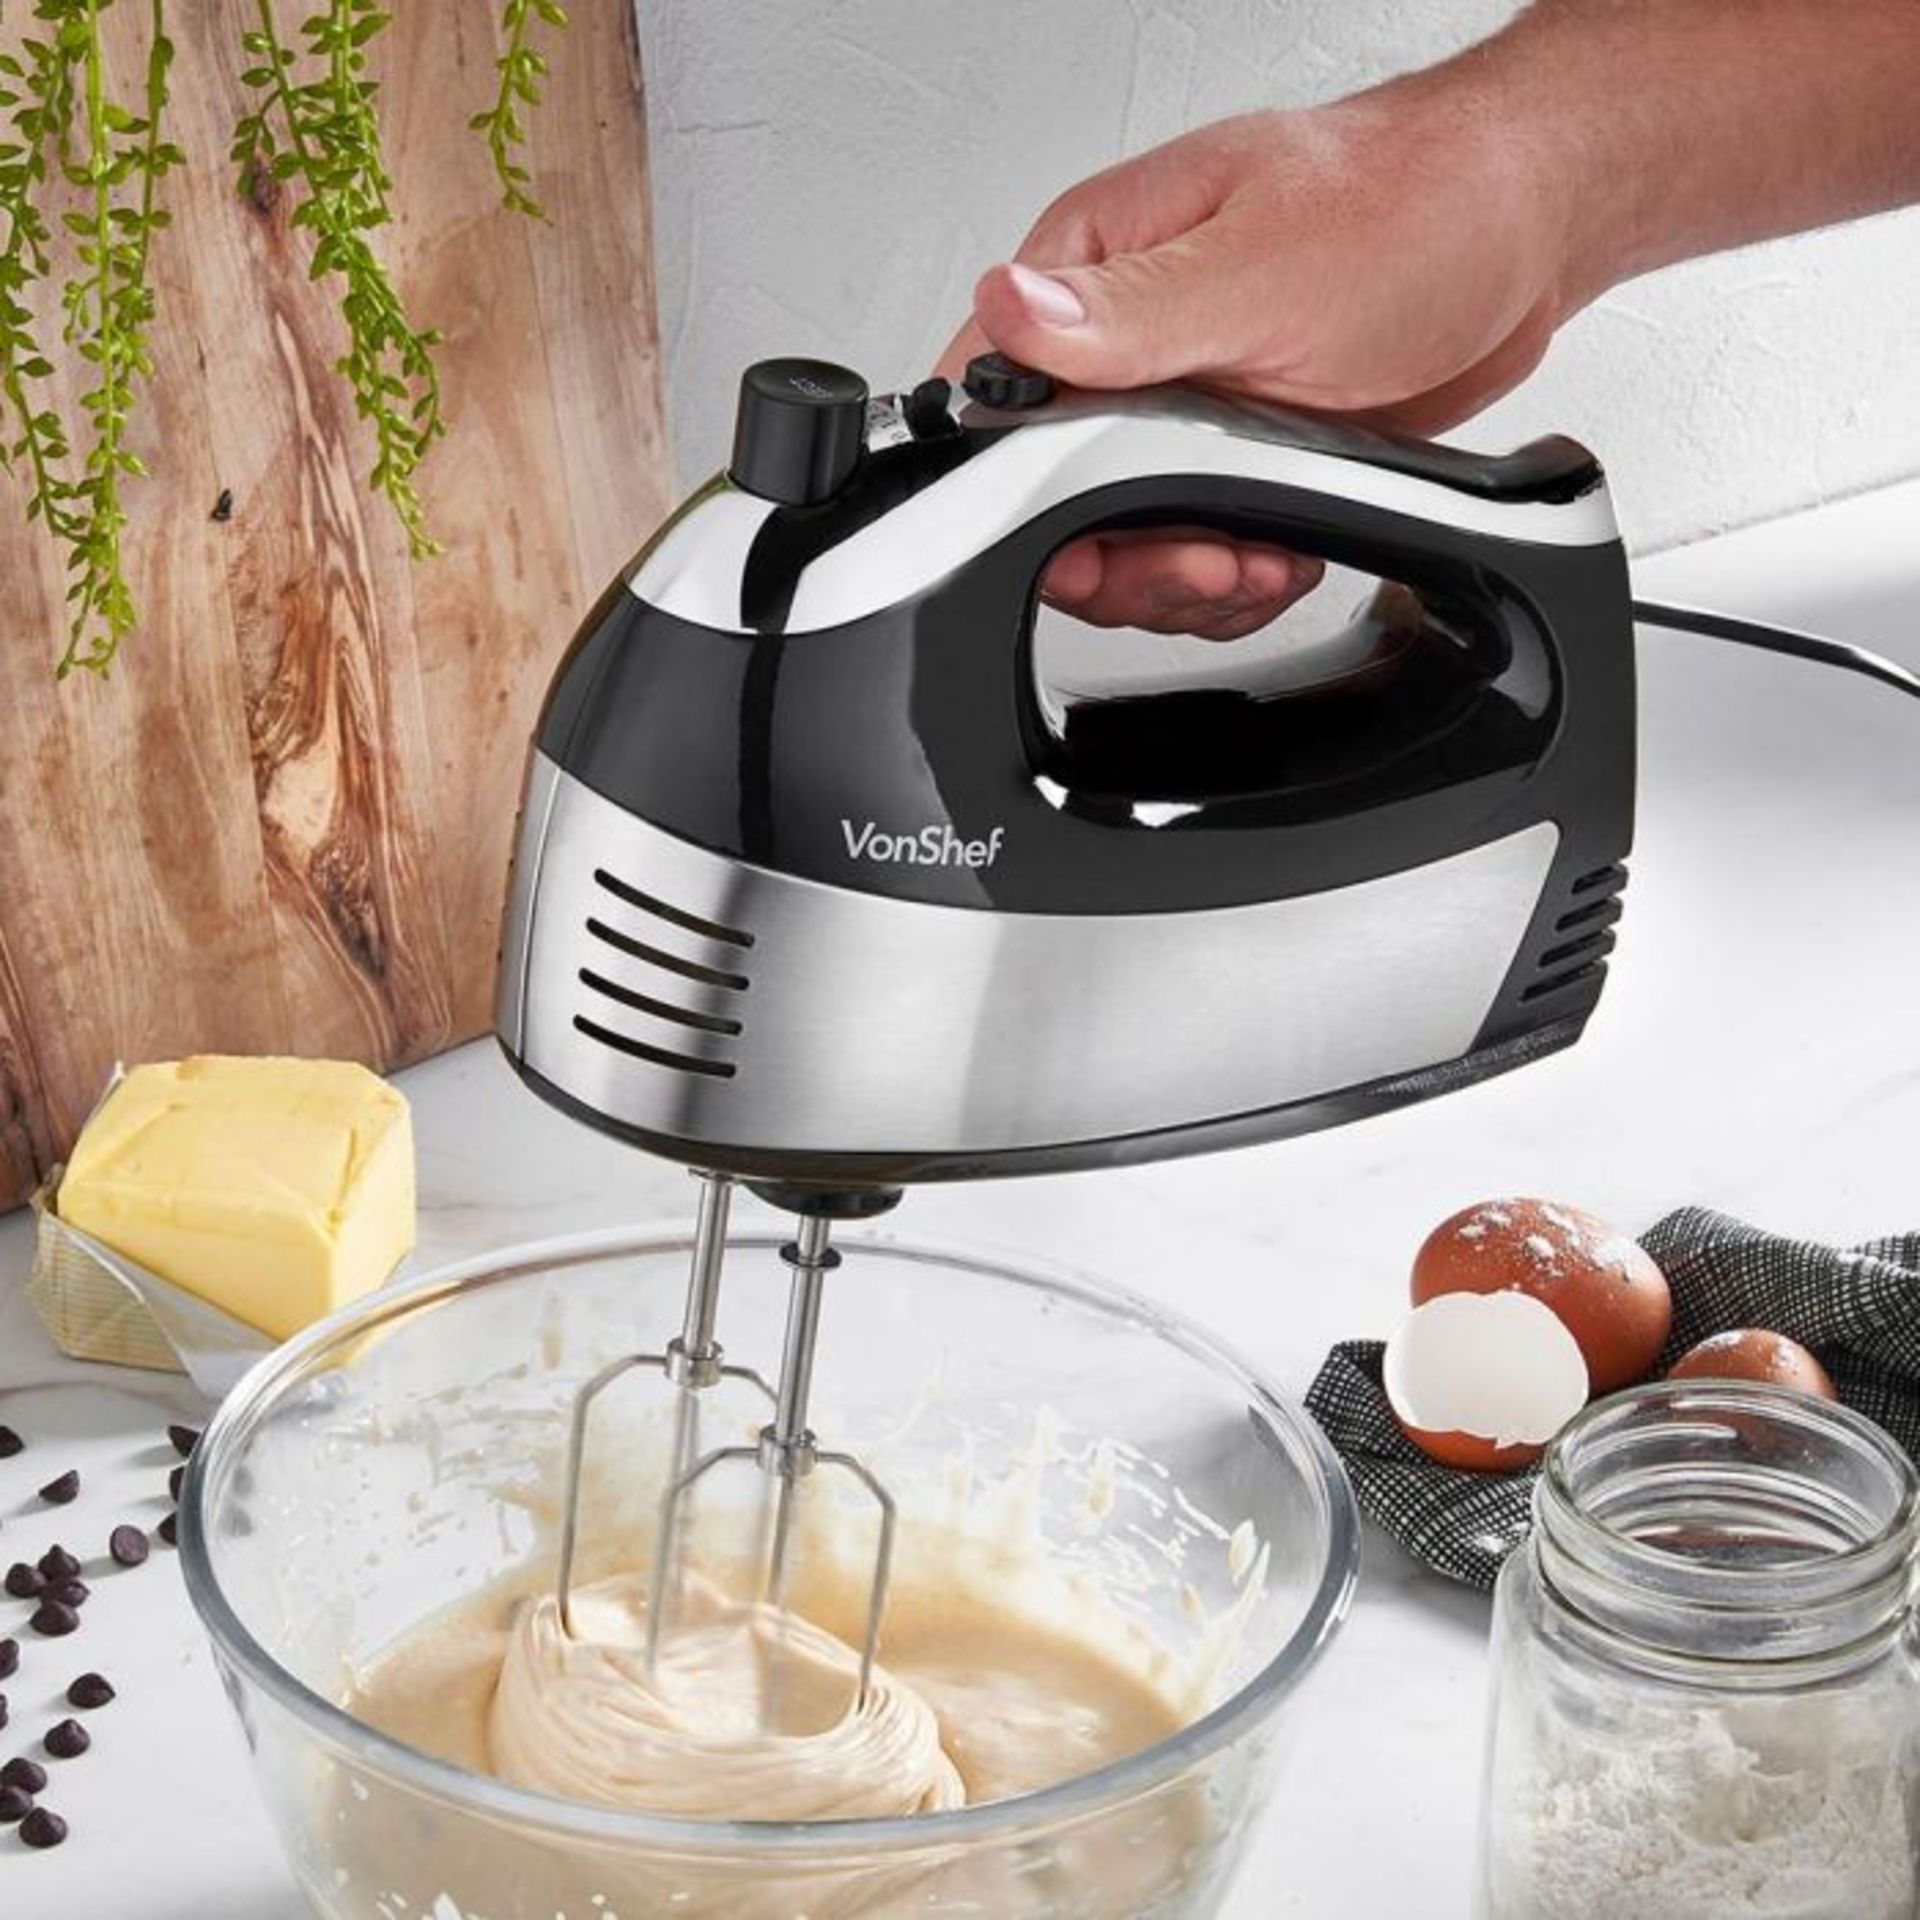 (S62) 400W Black Hand Mixer Powerful 400W motor lets you whisk, mix and knead effortlessly I... - Image 4 of 5